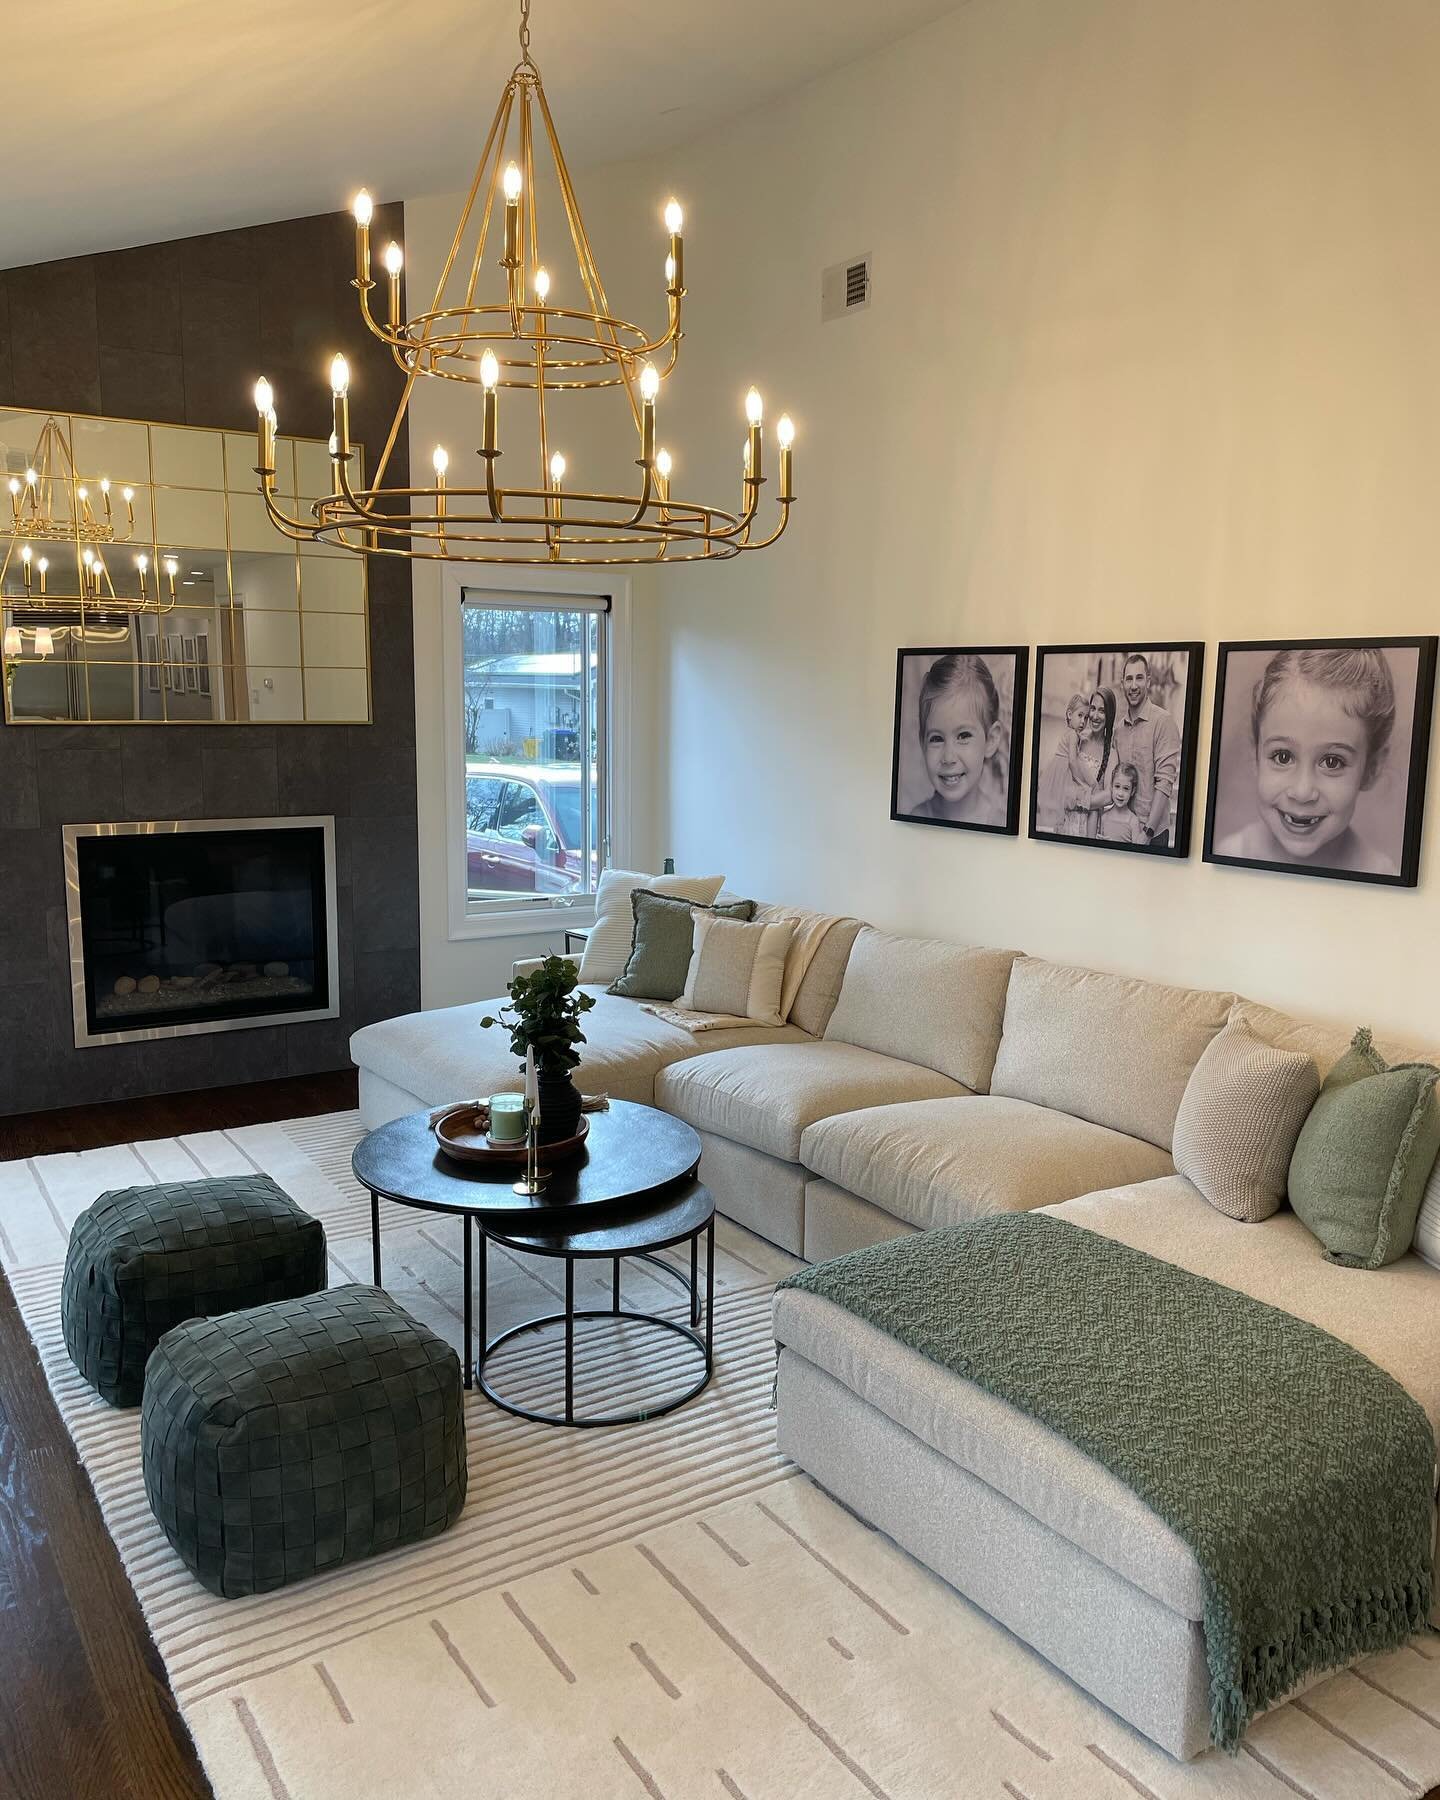 Did you ever wonder what the process is like to transforming a room?

Swipe to see the renderings, design board and the before picture of this family room and watch it come from concept to reality!

#3drenders #3drenderings #designrendering #designbo